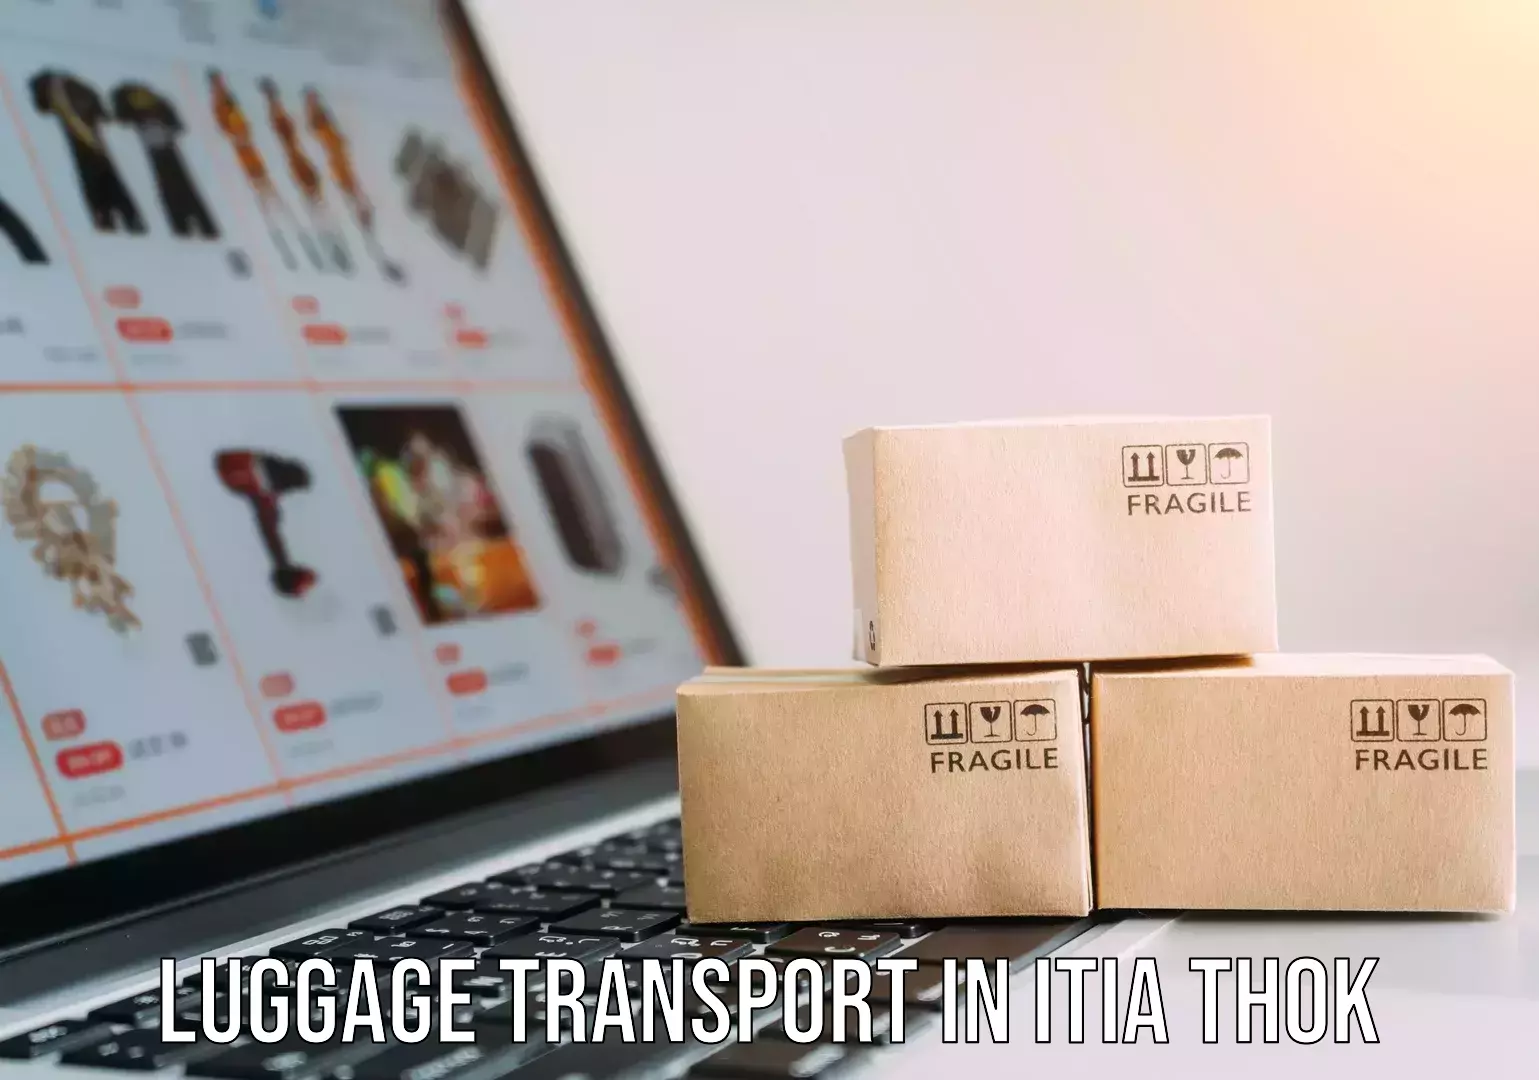 Luggage transport deals in Itia Thok